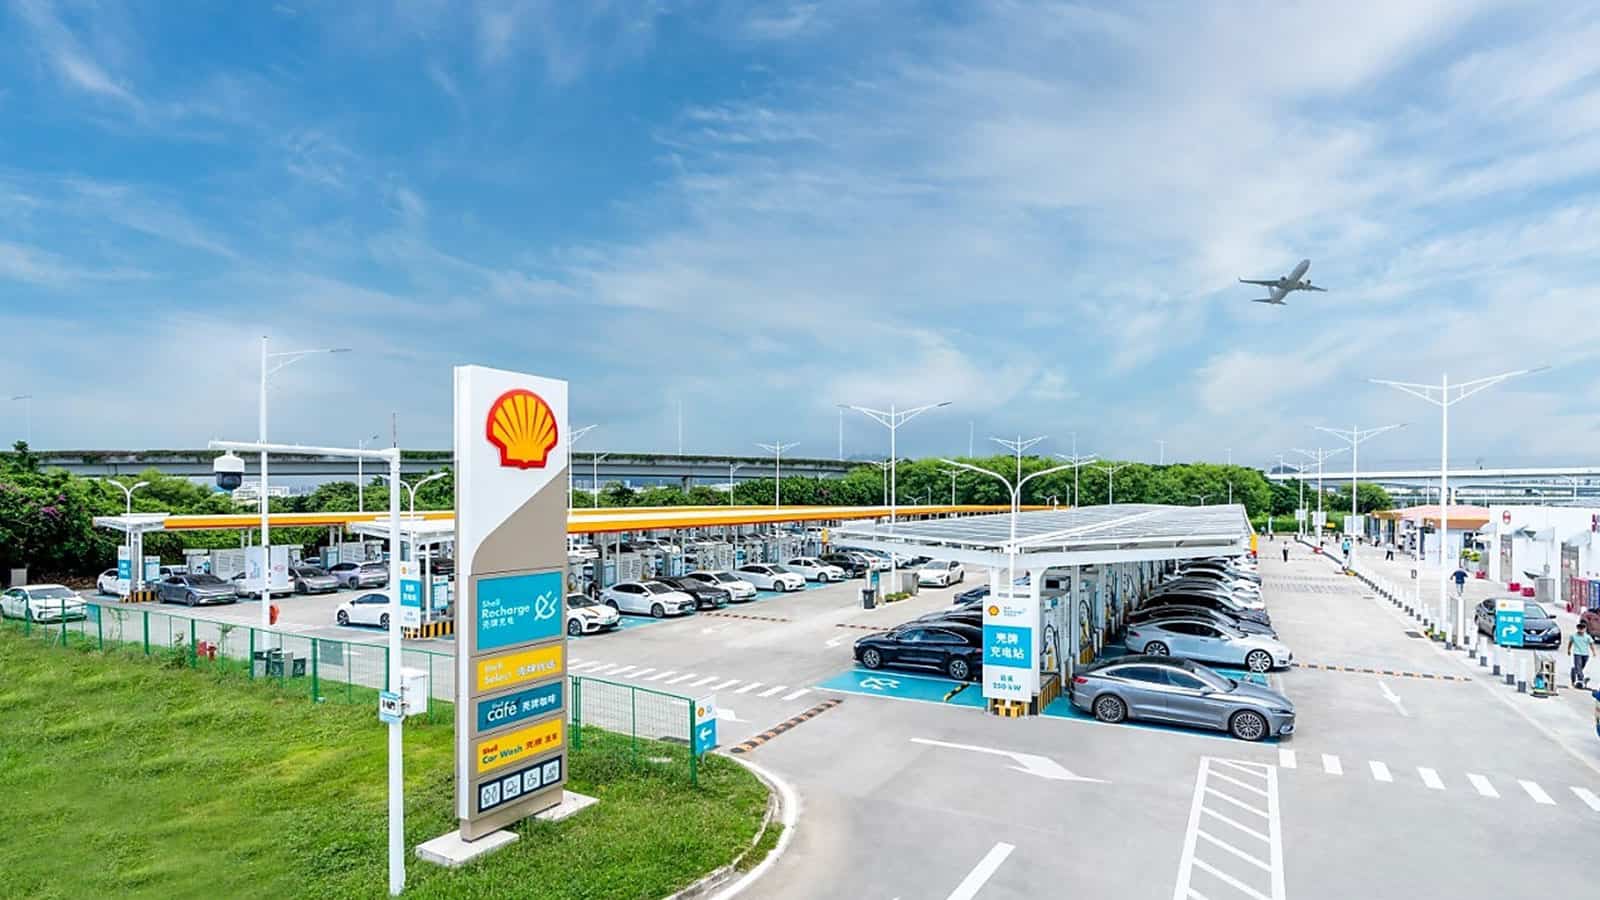 Shanghai Airport Shell BYD Charging station from entry/exit